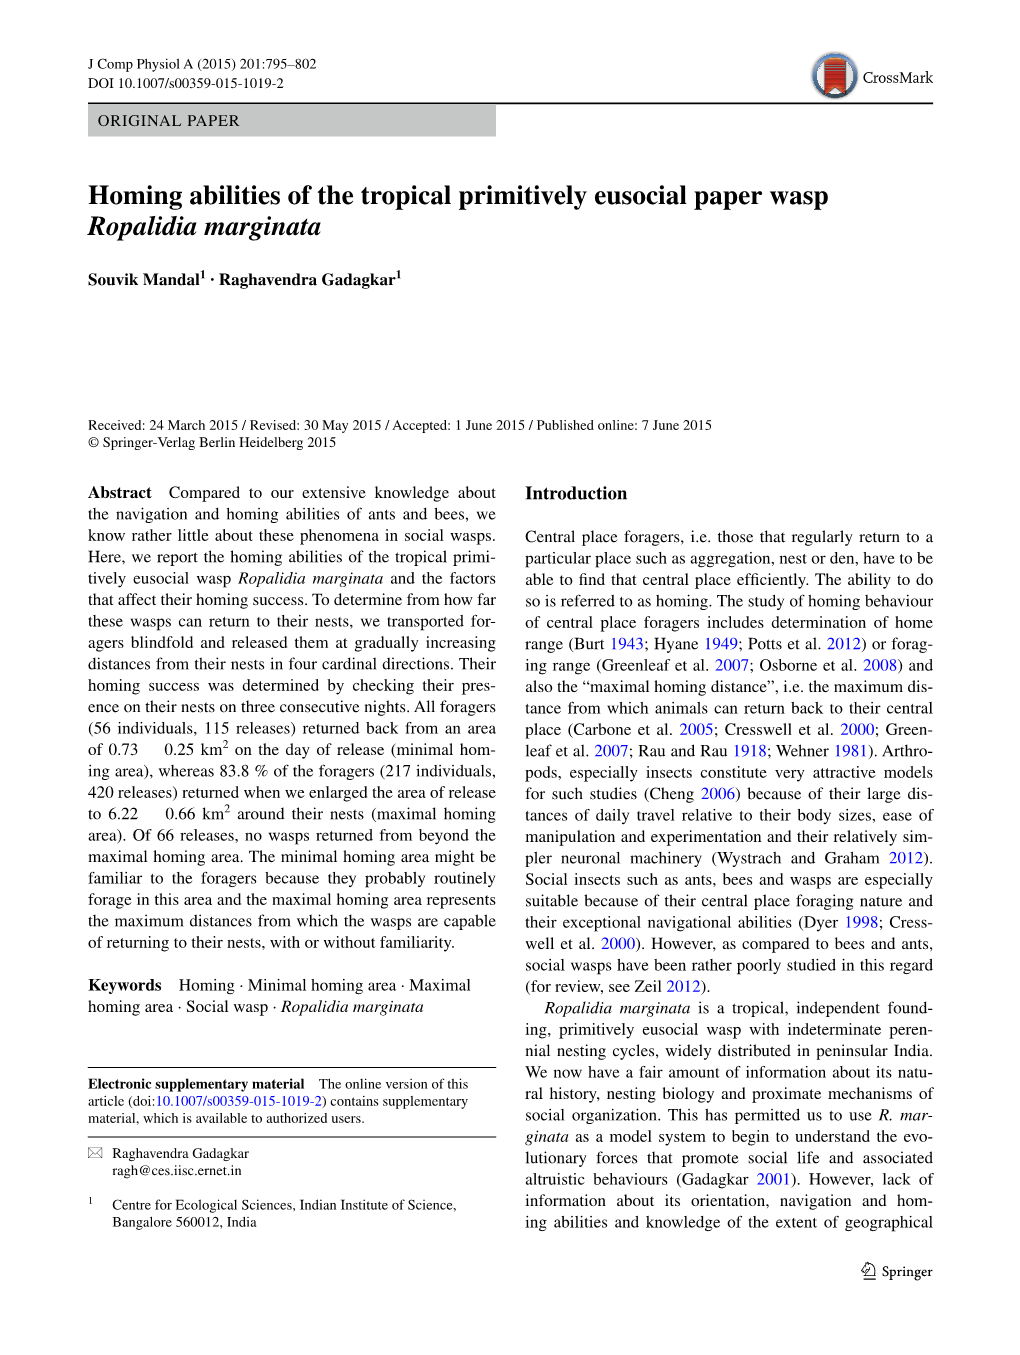 Homing Abilities of the Tropical Primitively Eusocial Paper Wasp Ropalidia Marginata